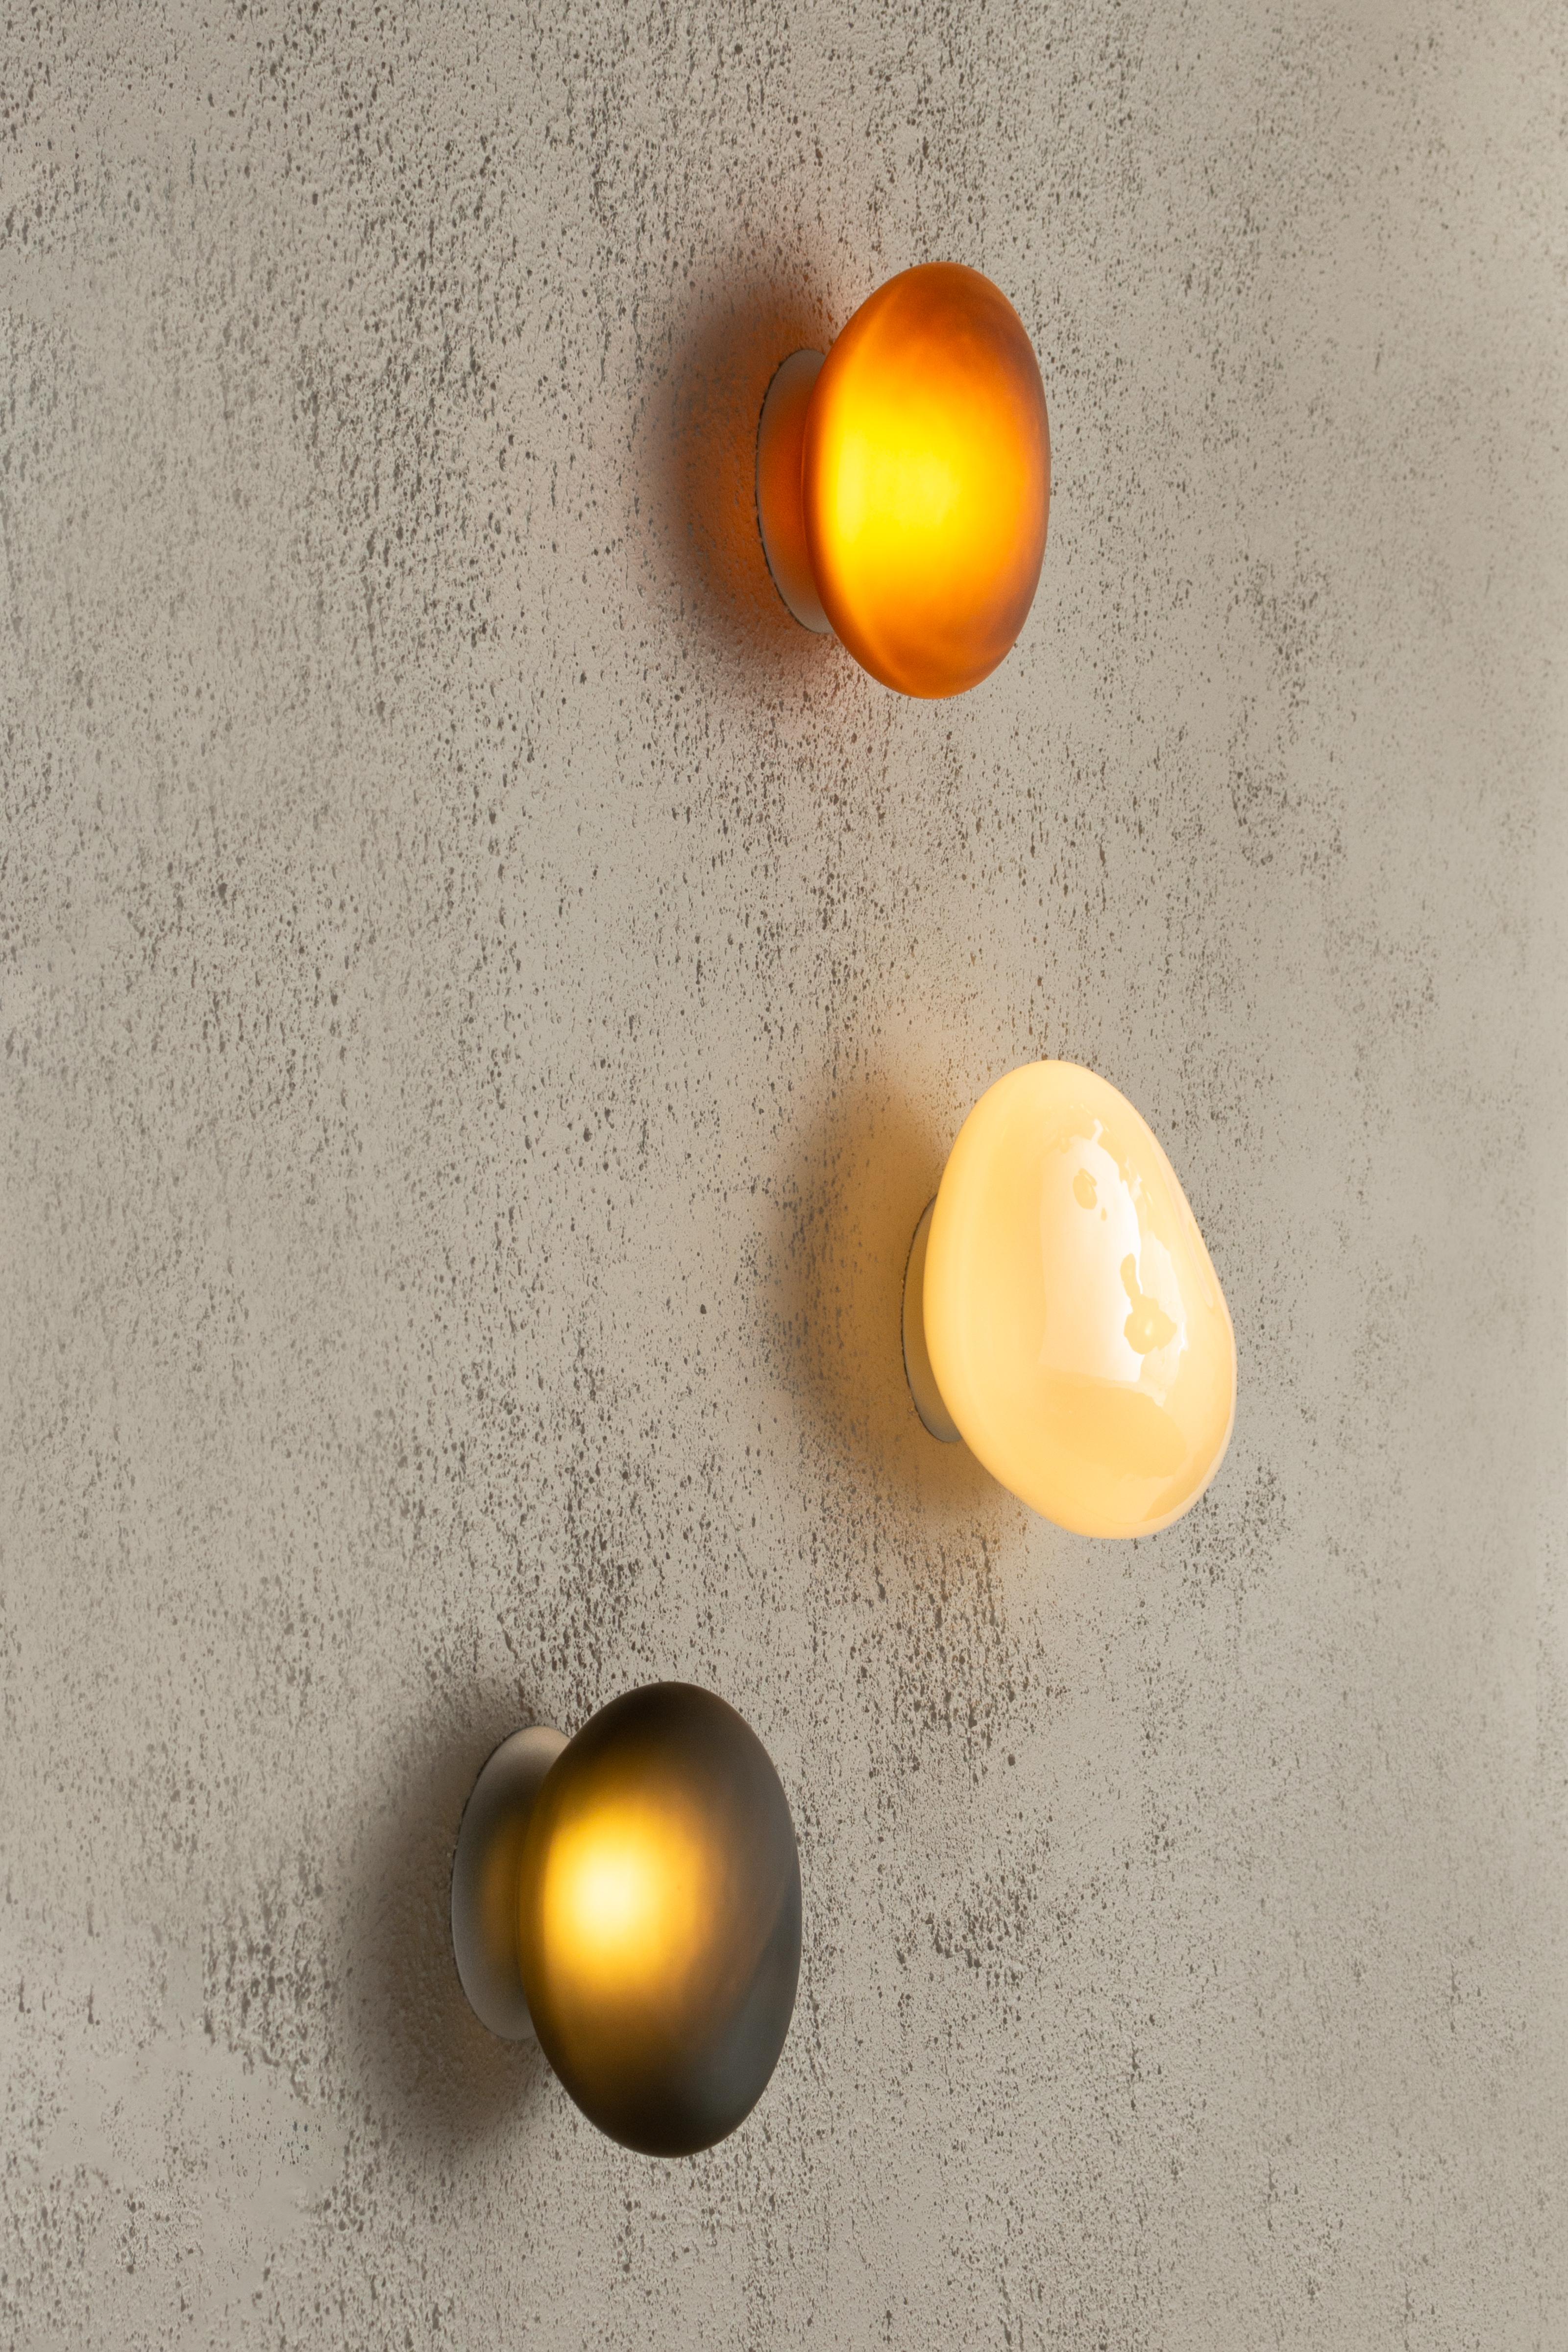 Contemporary Wall lamp Pebble 

Electrical : 
Voltage: 110 – 277V / 220 – 240V
Integral LED source : 1 x 4W LED

The model shown in picture:
Dimensions: C: 23 x 20 x 10 cm 
Color: Slate
______
Pebble
The Pebble series celebrates the